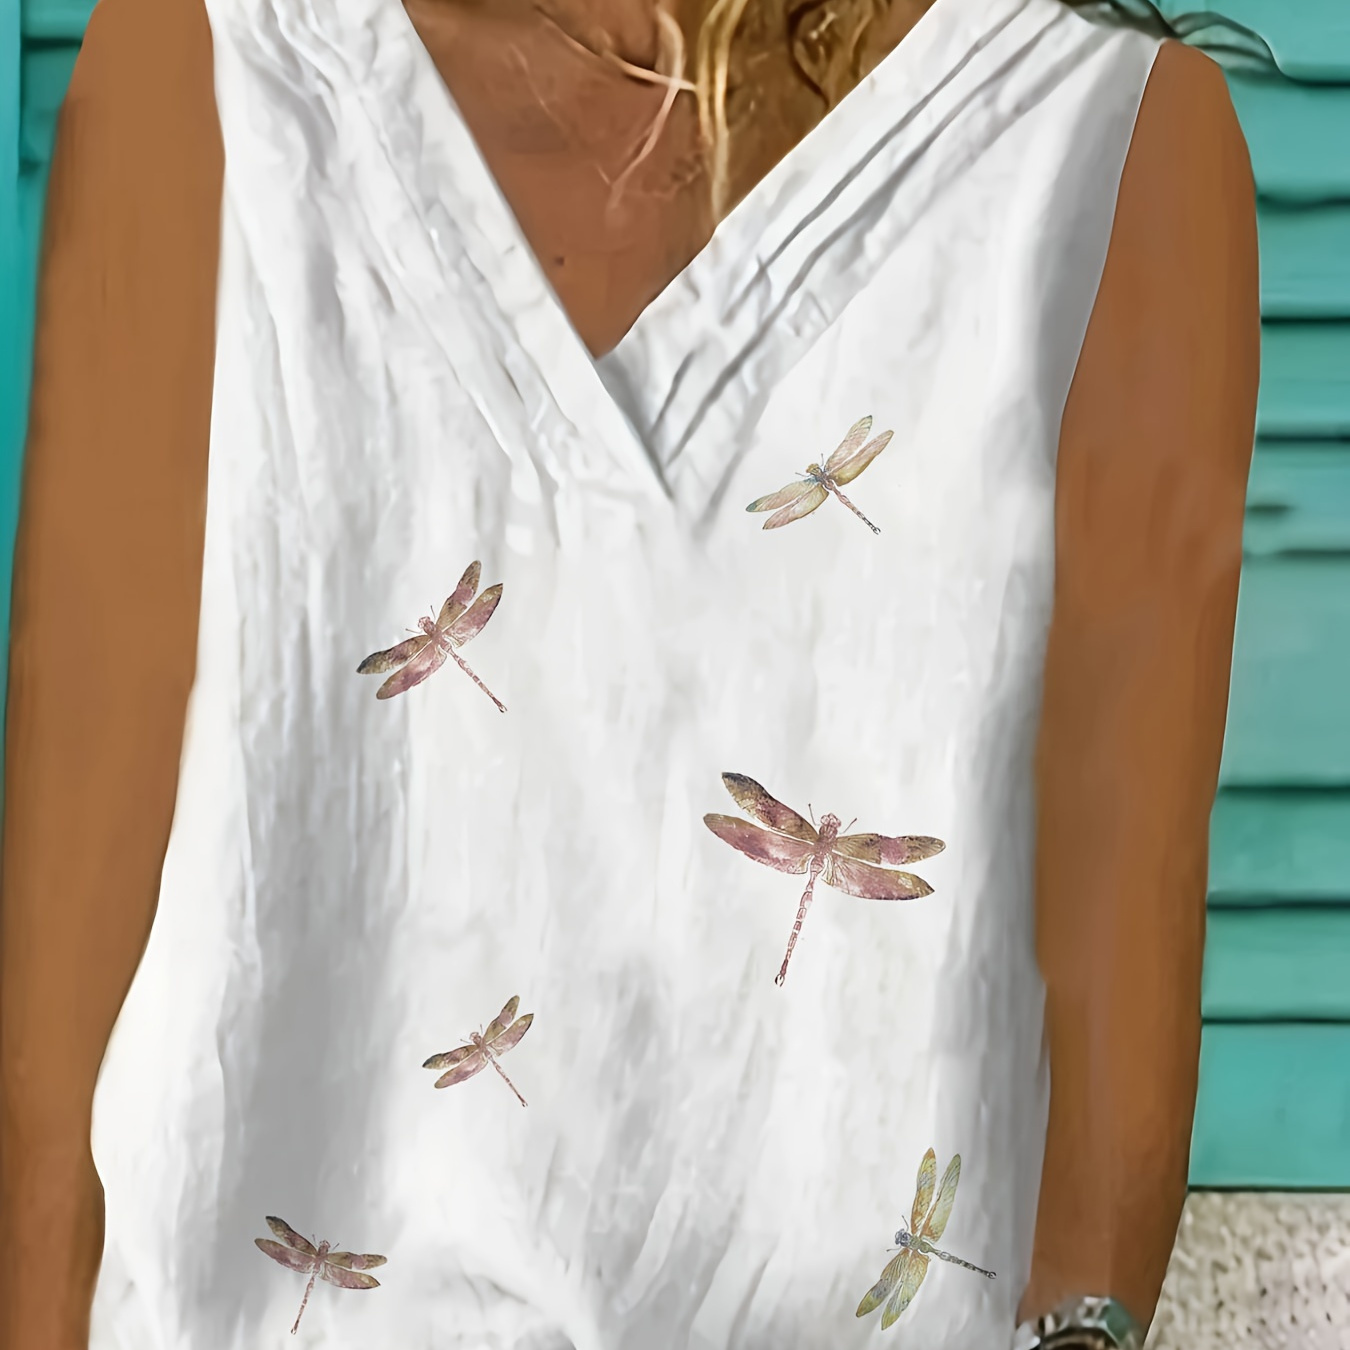 

Dragonfly Print Tank Top, Casual V Neck Vest For Summer, Women's Clothing